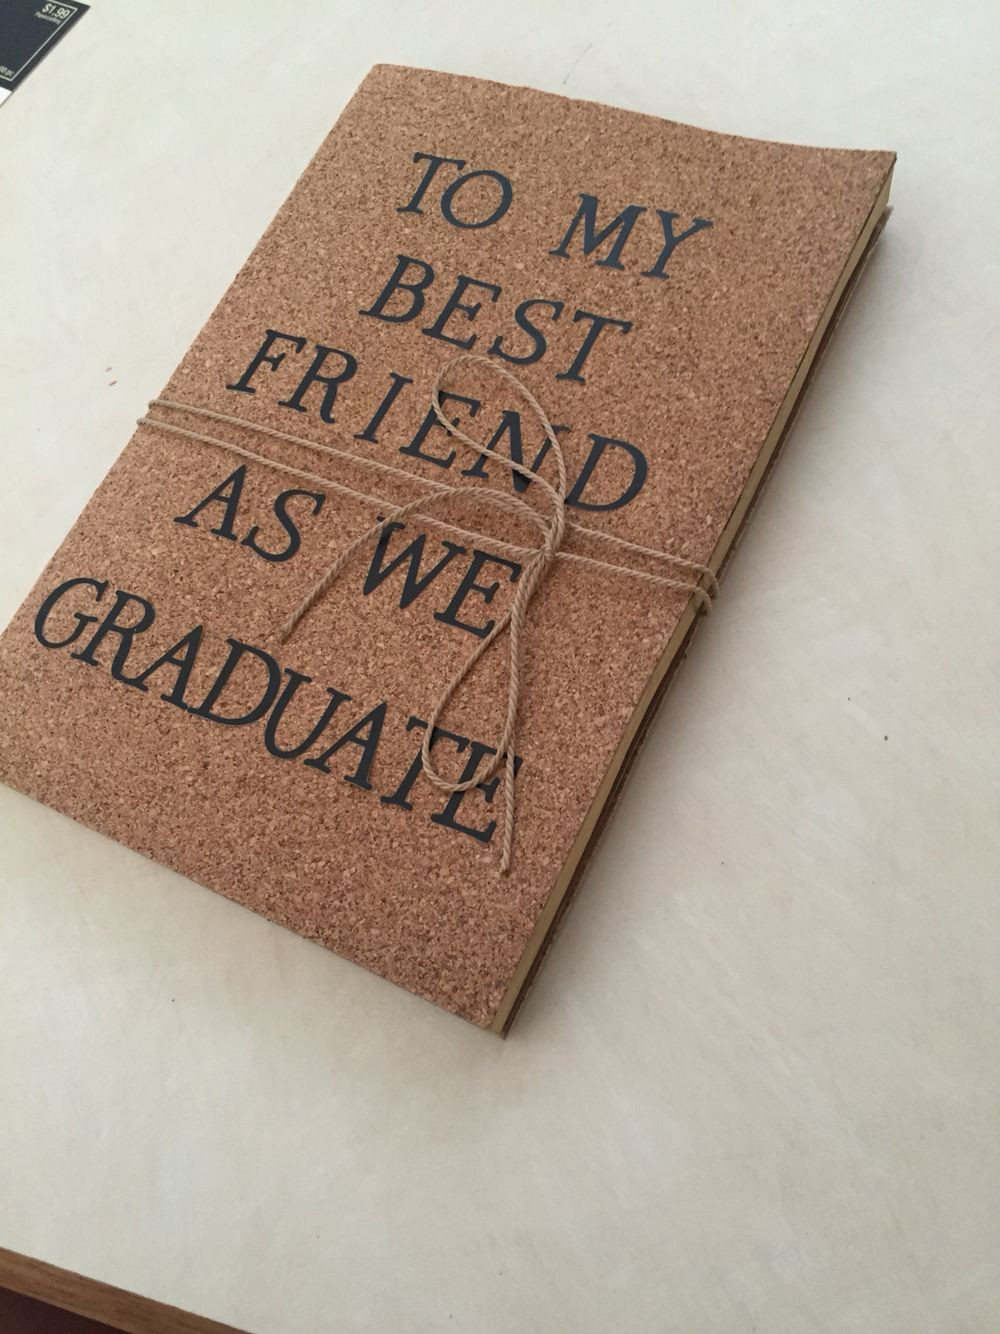 Graduation Gift Ideas For Your Best Friend
 A journal I made for my best friend as a graduation t